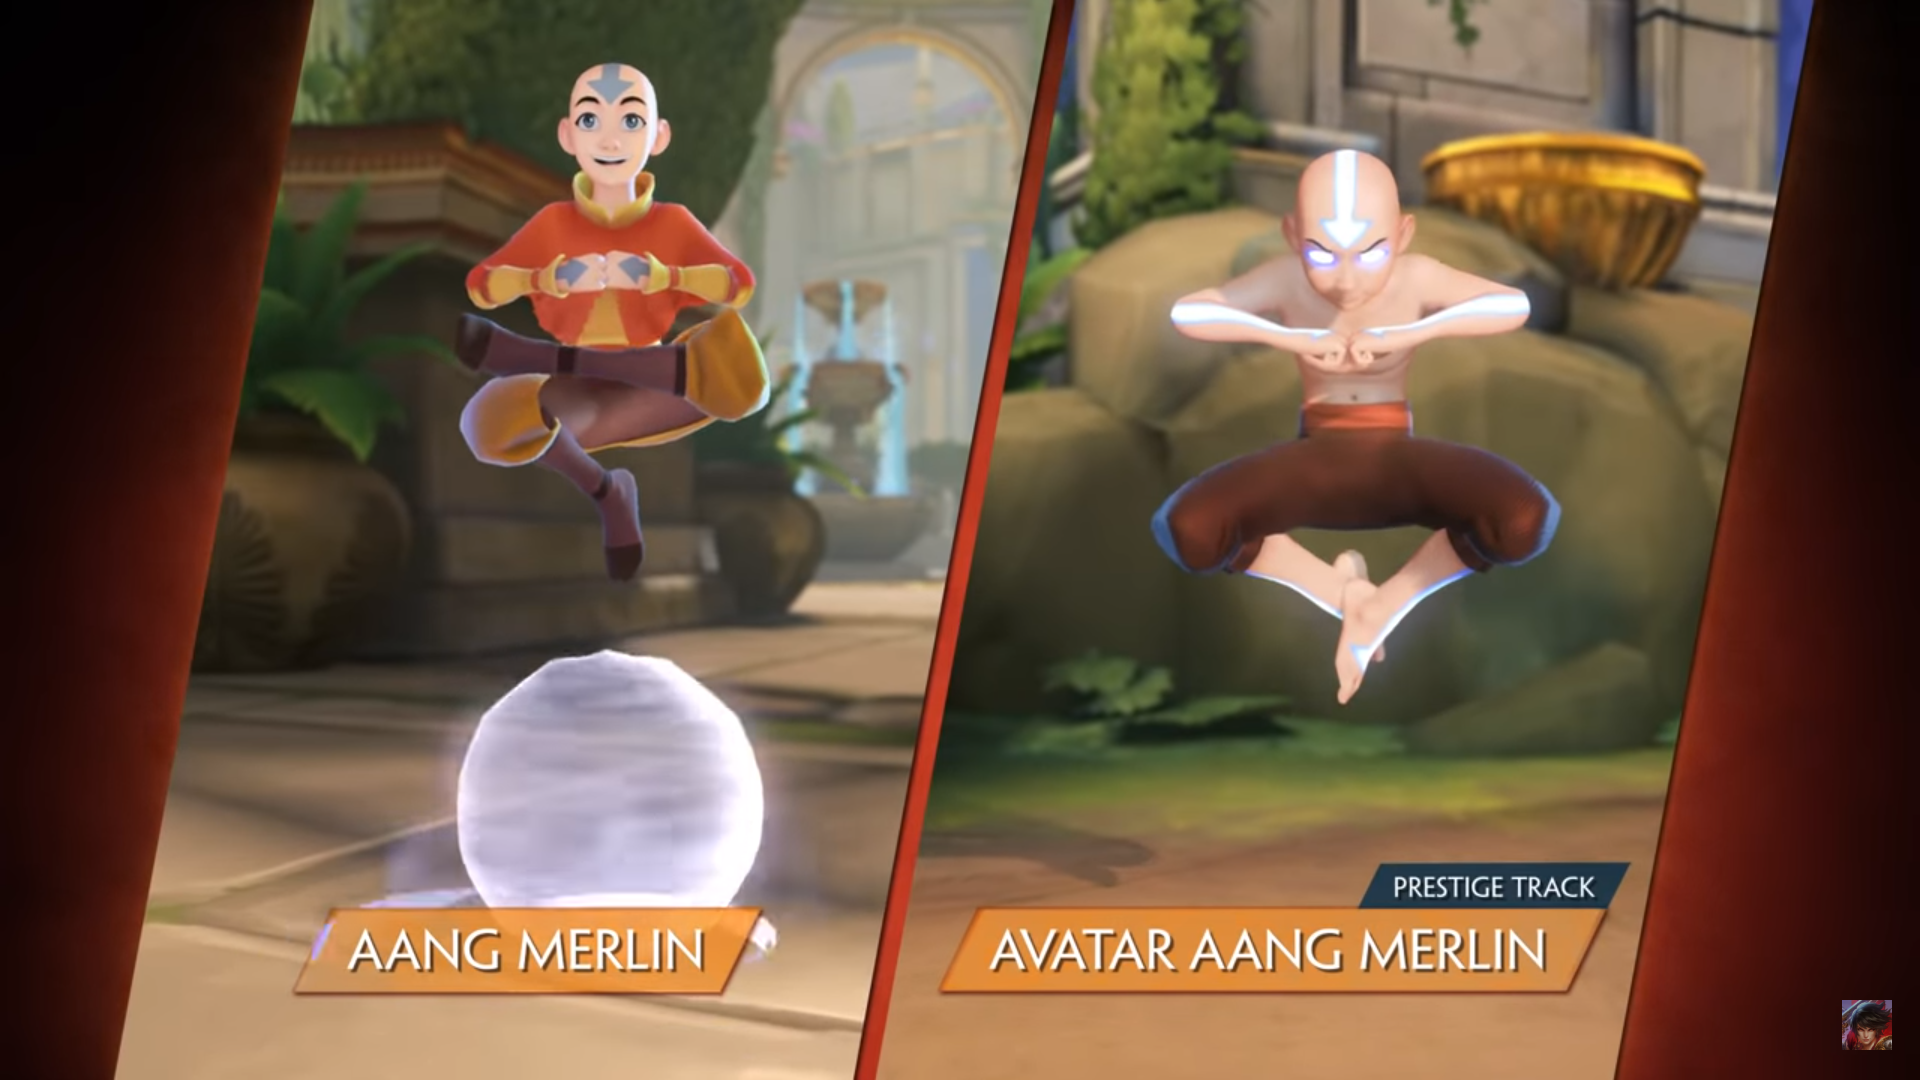 Image for Avatar: The Last Airbender and The Legend of Korra characters are coming to Smite